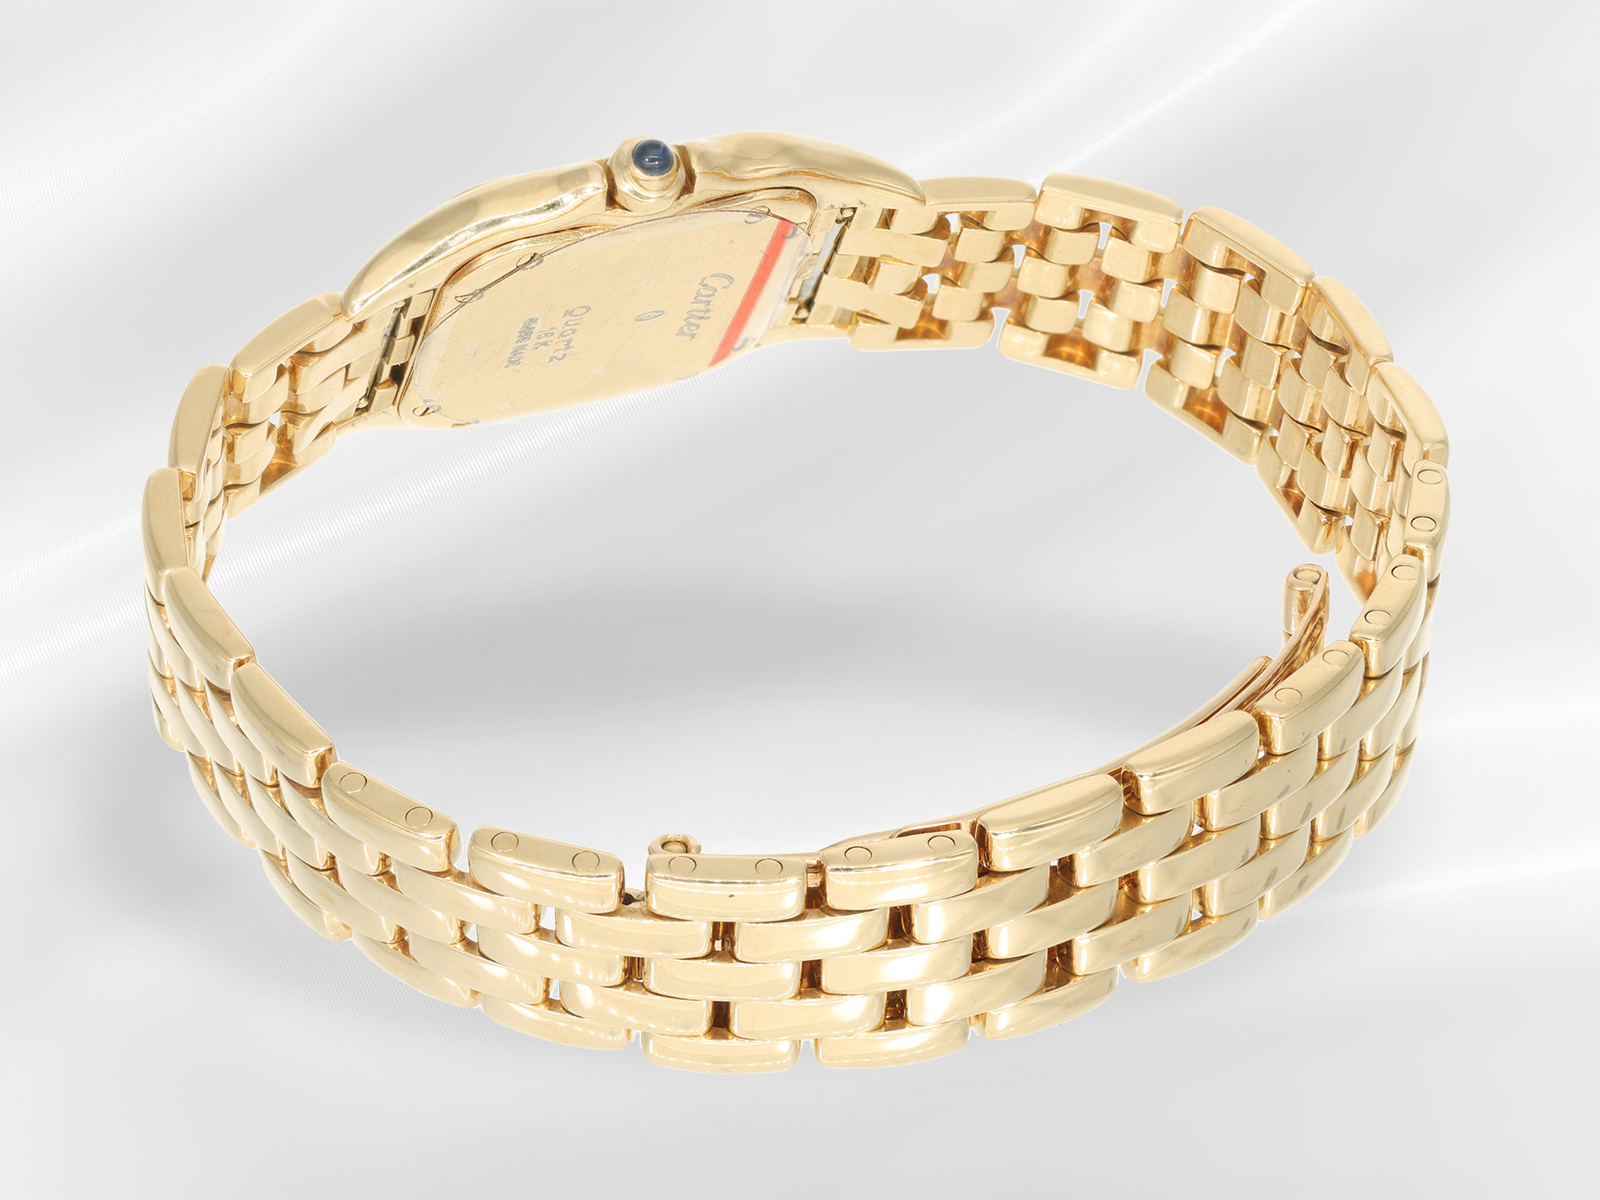 Wristwatch: luxurious Cartier ladies' watch in 18K gold "Panthère 22 x 28" - Image 4 of 4